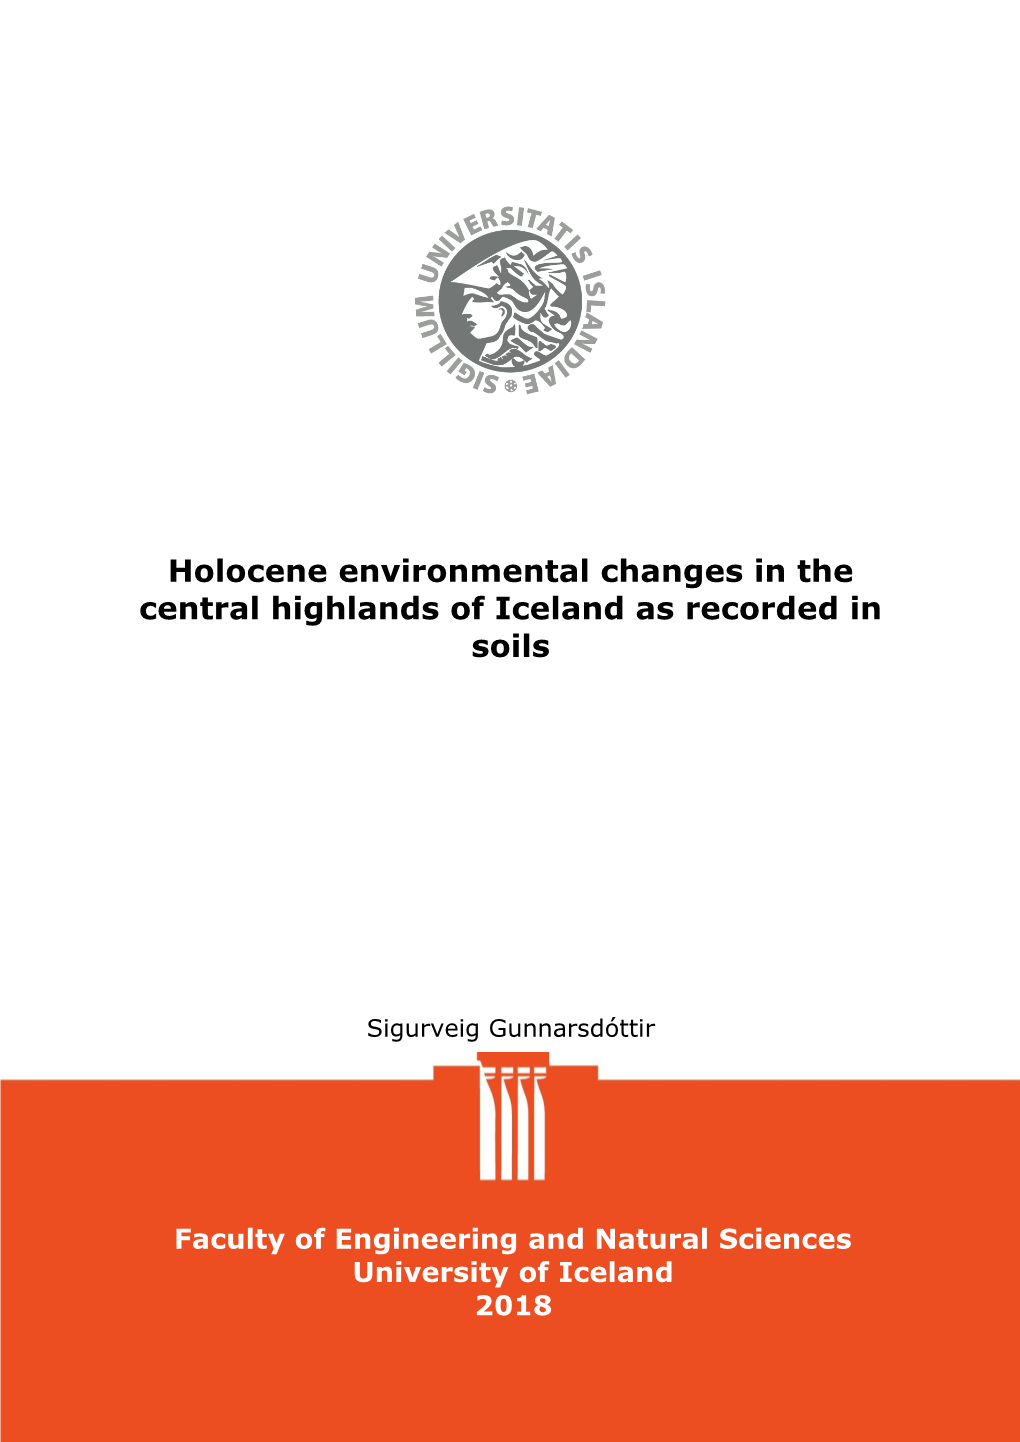 Holocene Environmental Changes in the Central Highlands of Iceland As Recorded in Soils